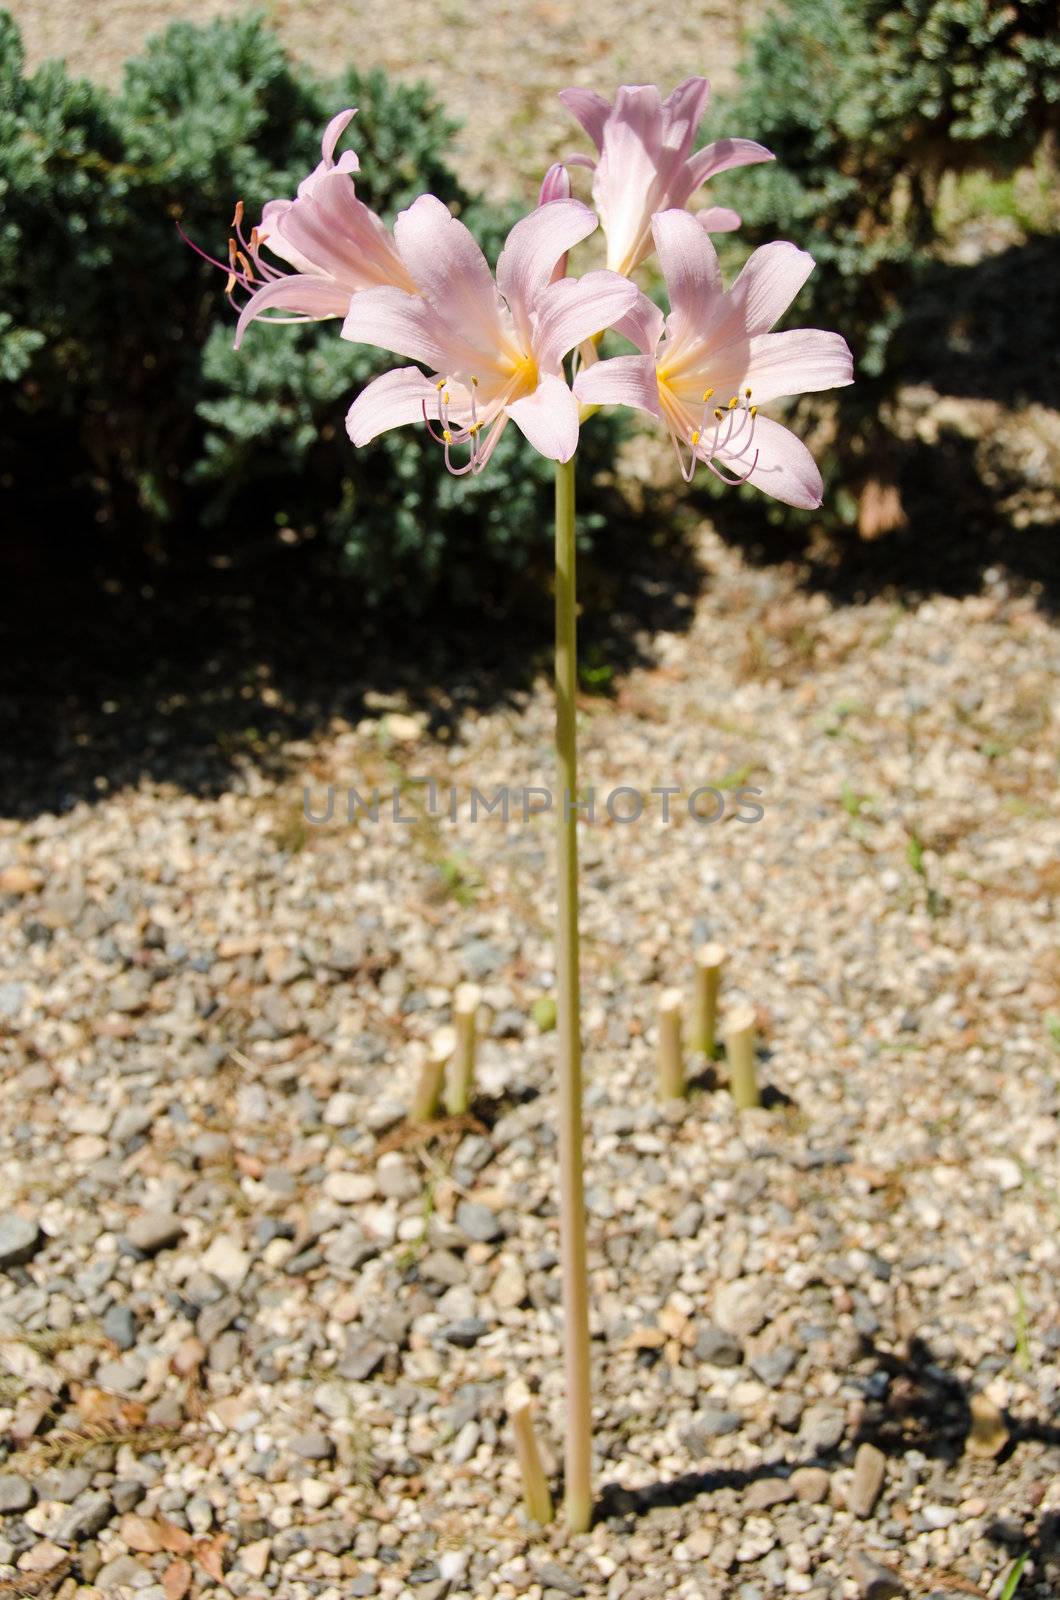 A complete view of the Resurrection lily, Lycoris squamigera in Japan (kitsune no kamisori in japanese)